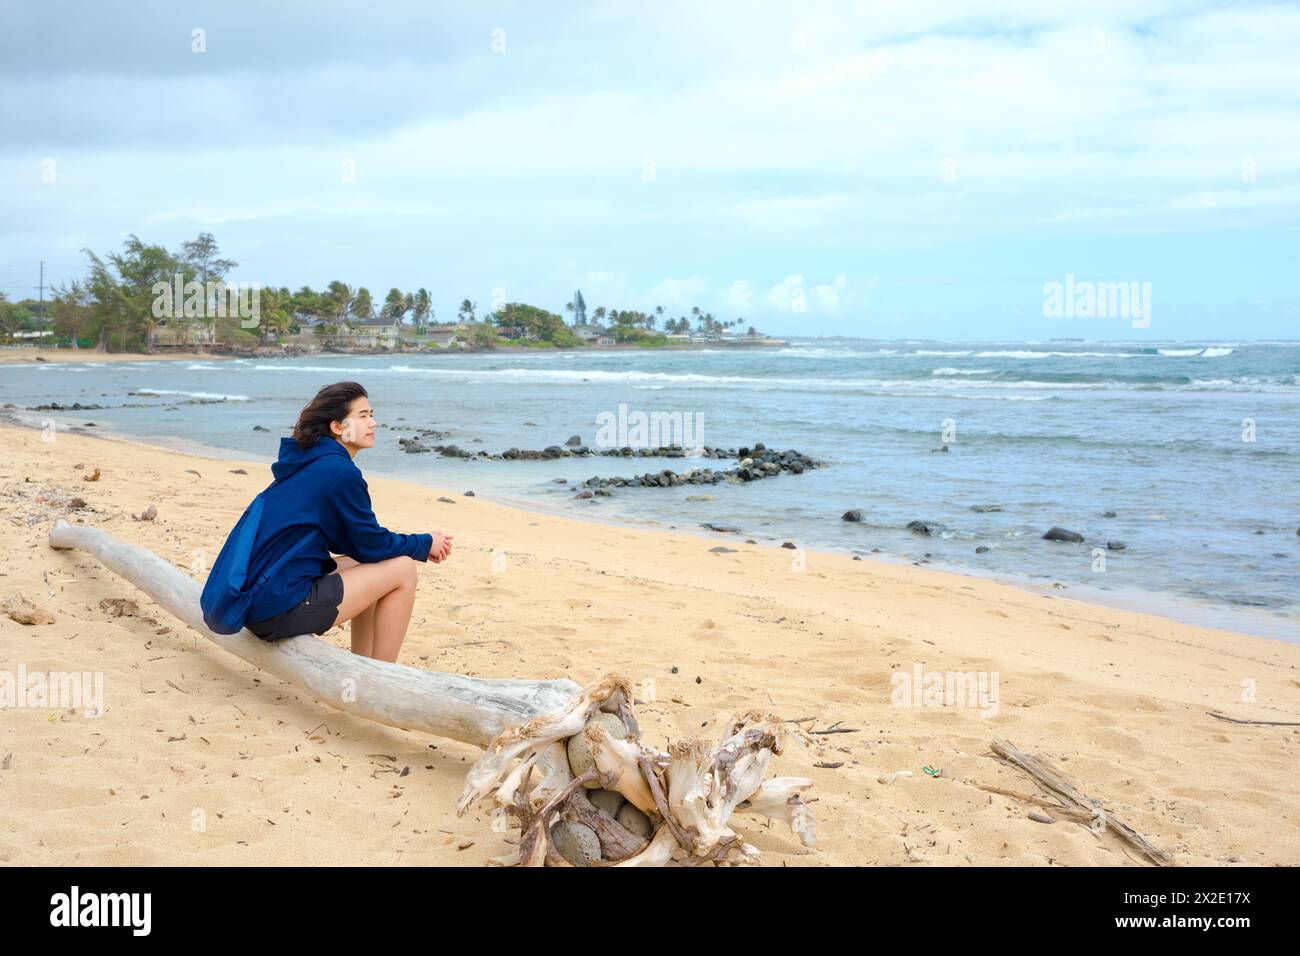 Young teen girl sitting alone on log on beach, looking out towards ocean, thinking Stock Photo